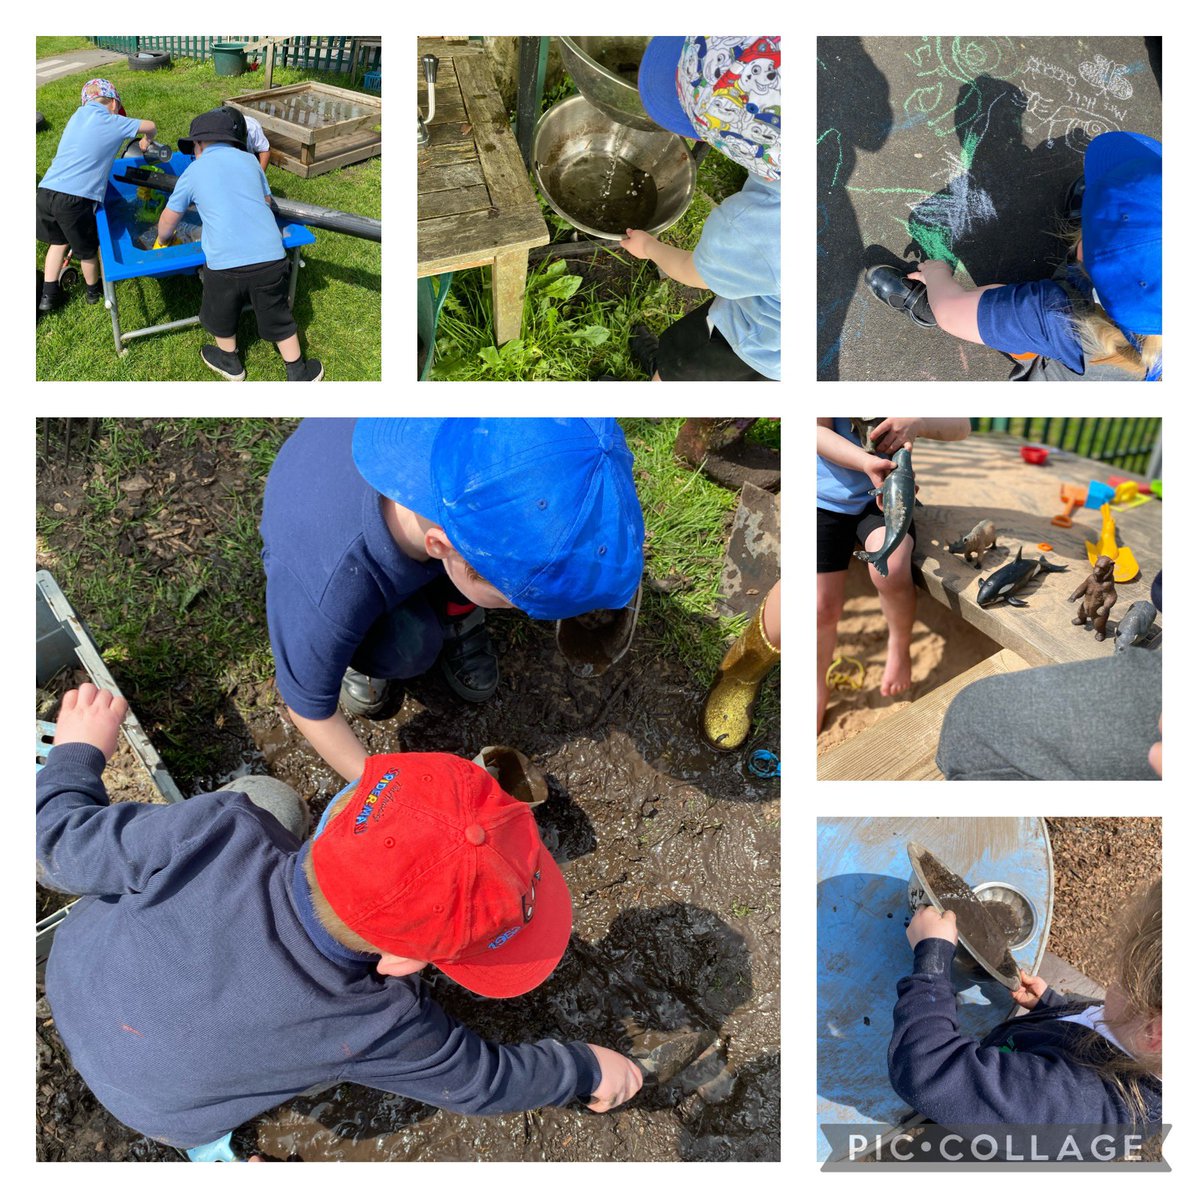 So much fun with #outdoorlearning in Nursery we’ve been #counting #digging #pouring #chalking and so much more!
#moonstonesandsunstones
#eyfs
#maths
#understandingtheworld
#expressiveartsanddesign